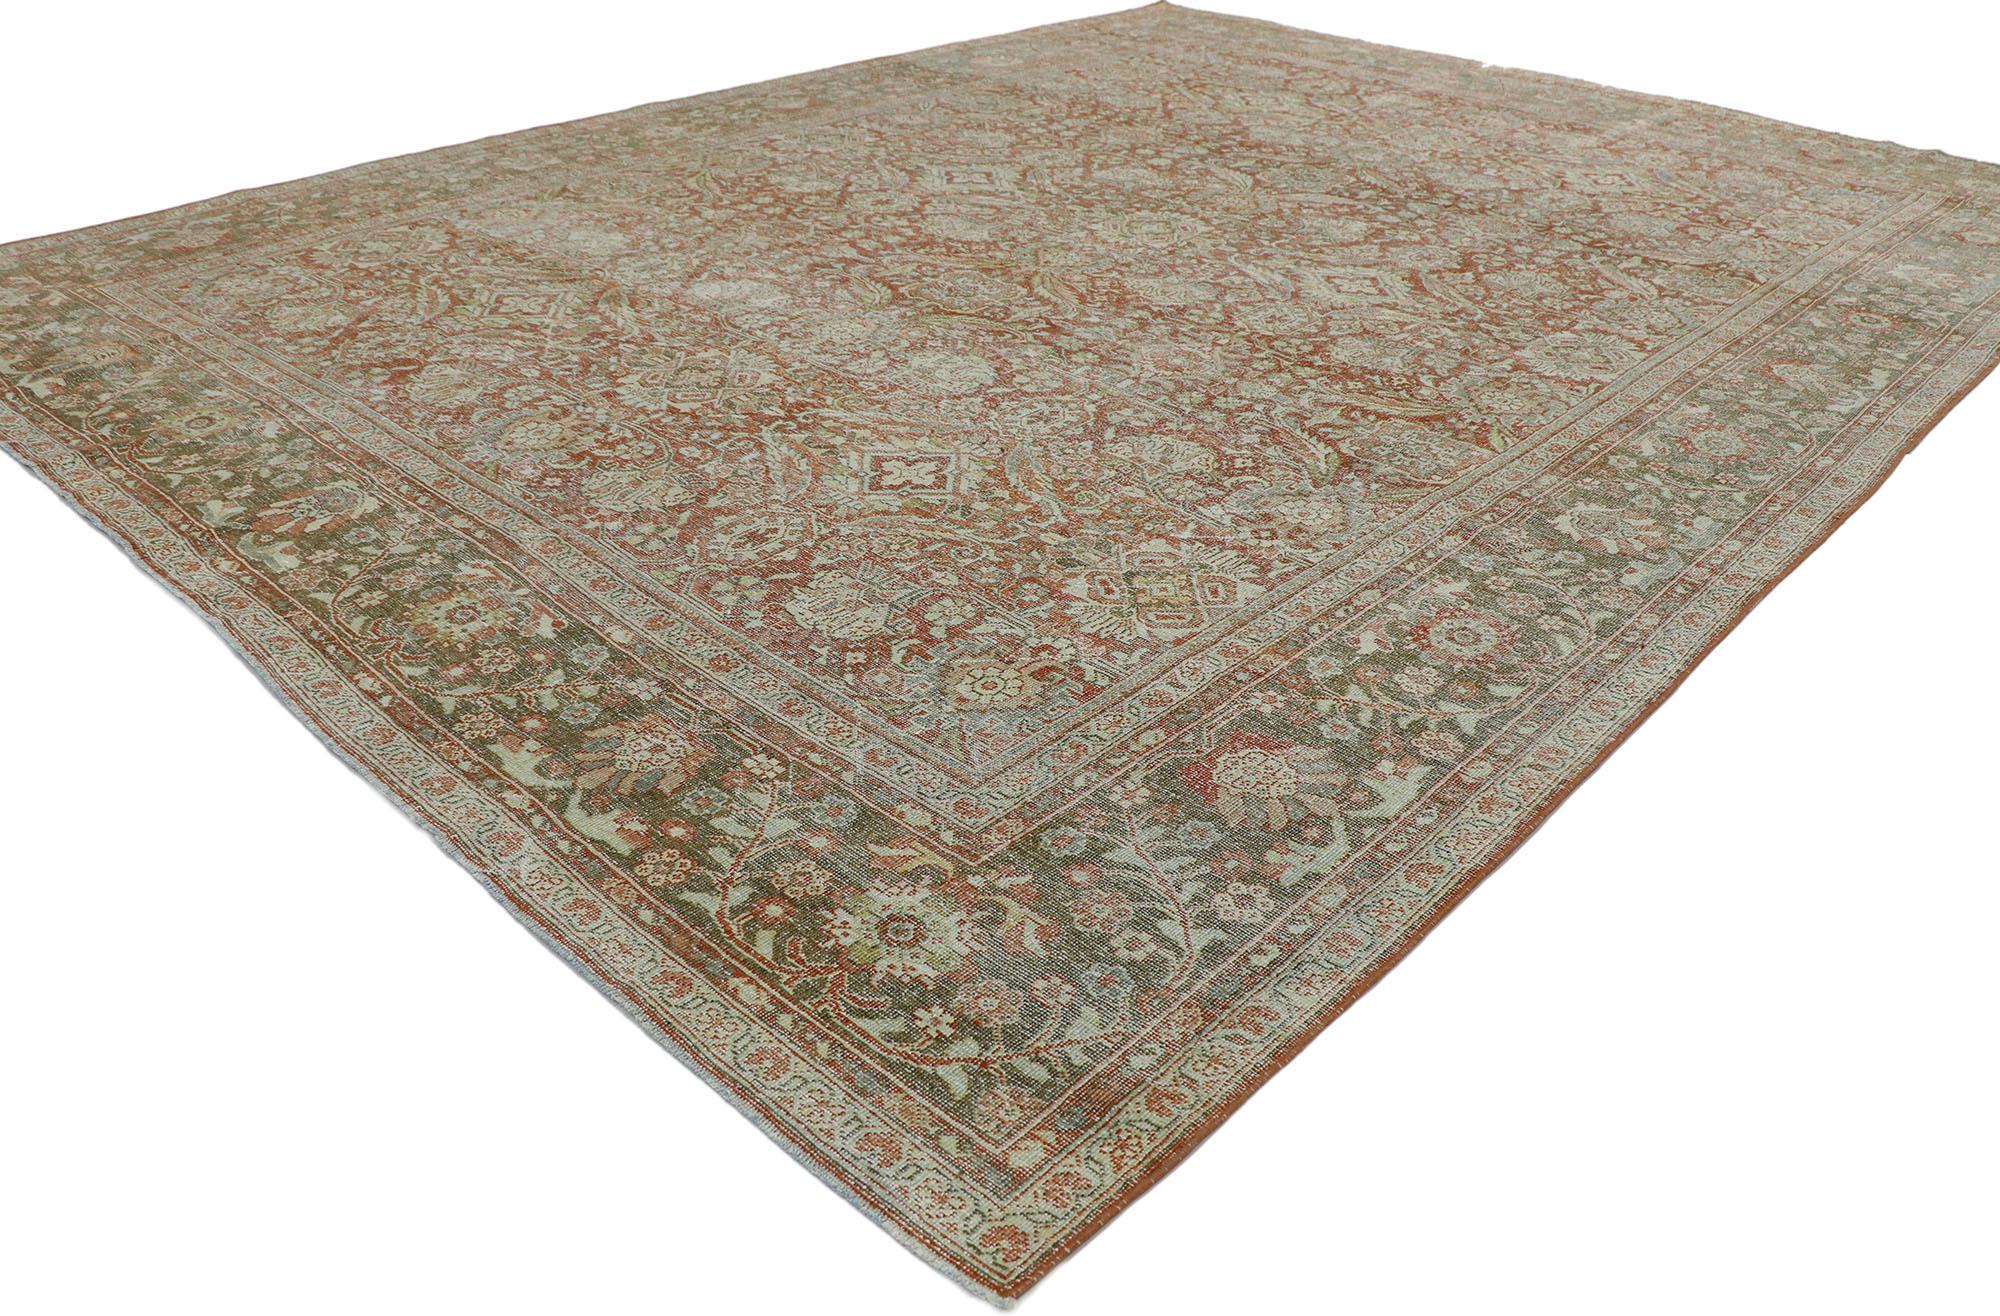 53232, distressed antique Persian Mahal rug with Rustic American Colonial style. Displaying well-balanced symmetry and a simple design aesthetic, this hand knotted wool distressed antique Persian Mahal rug beautifully embodies American Colonial